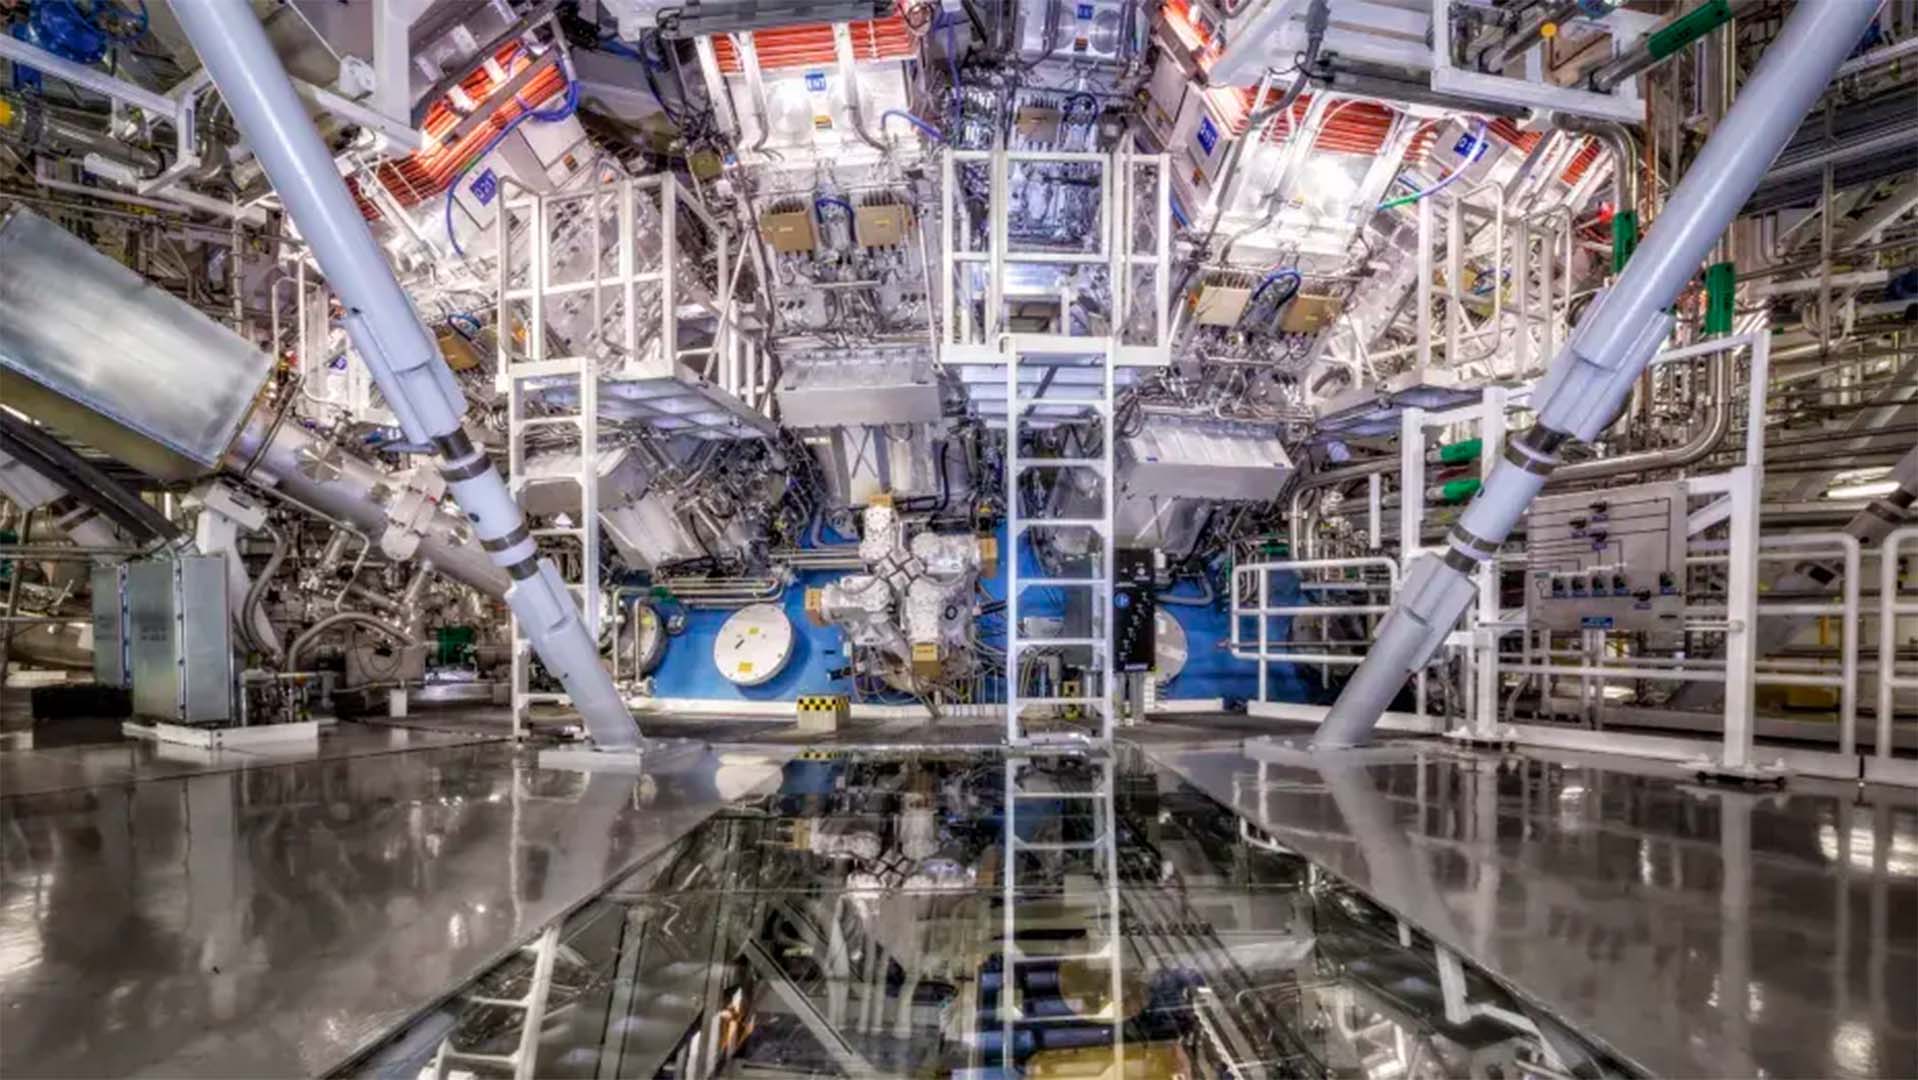 The target chamber of LLNL’s National Ignition Facility to achieve nuclear fusion ignition